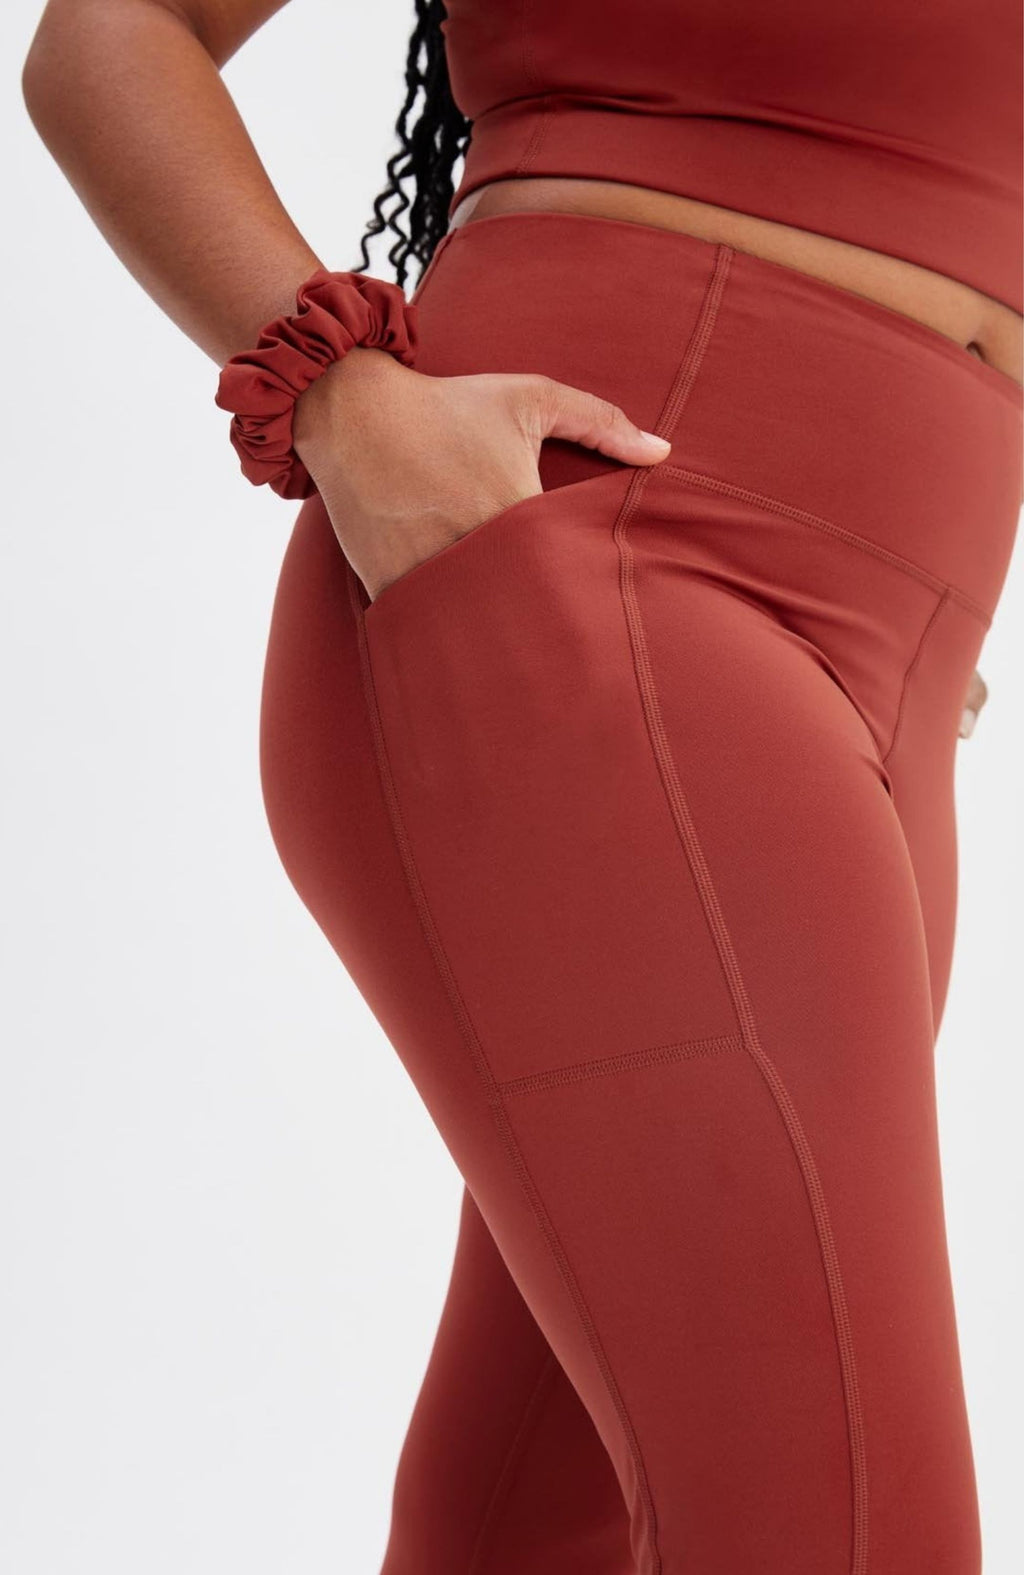 Arsenal High-Waisted Pockets Leggings - Coral - Rise Canada